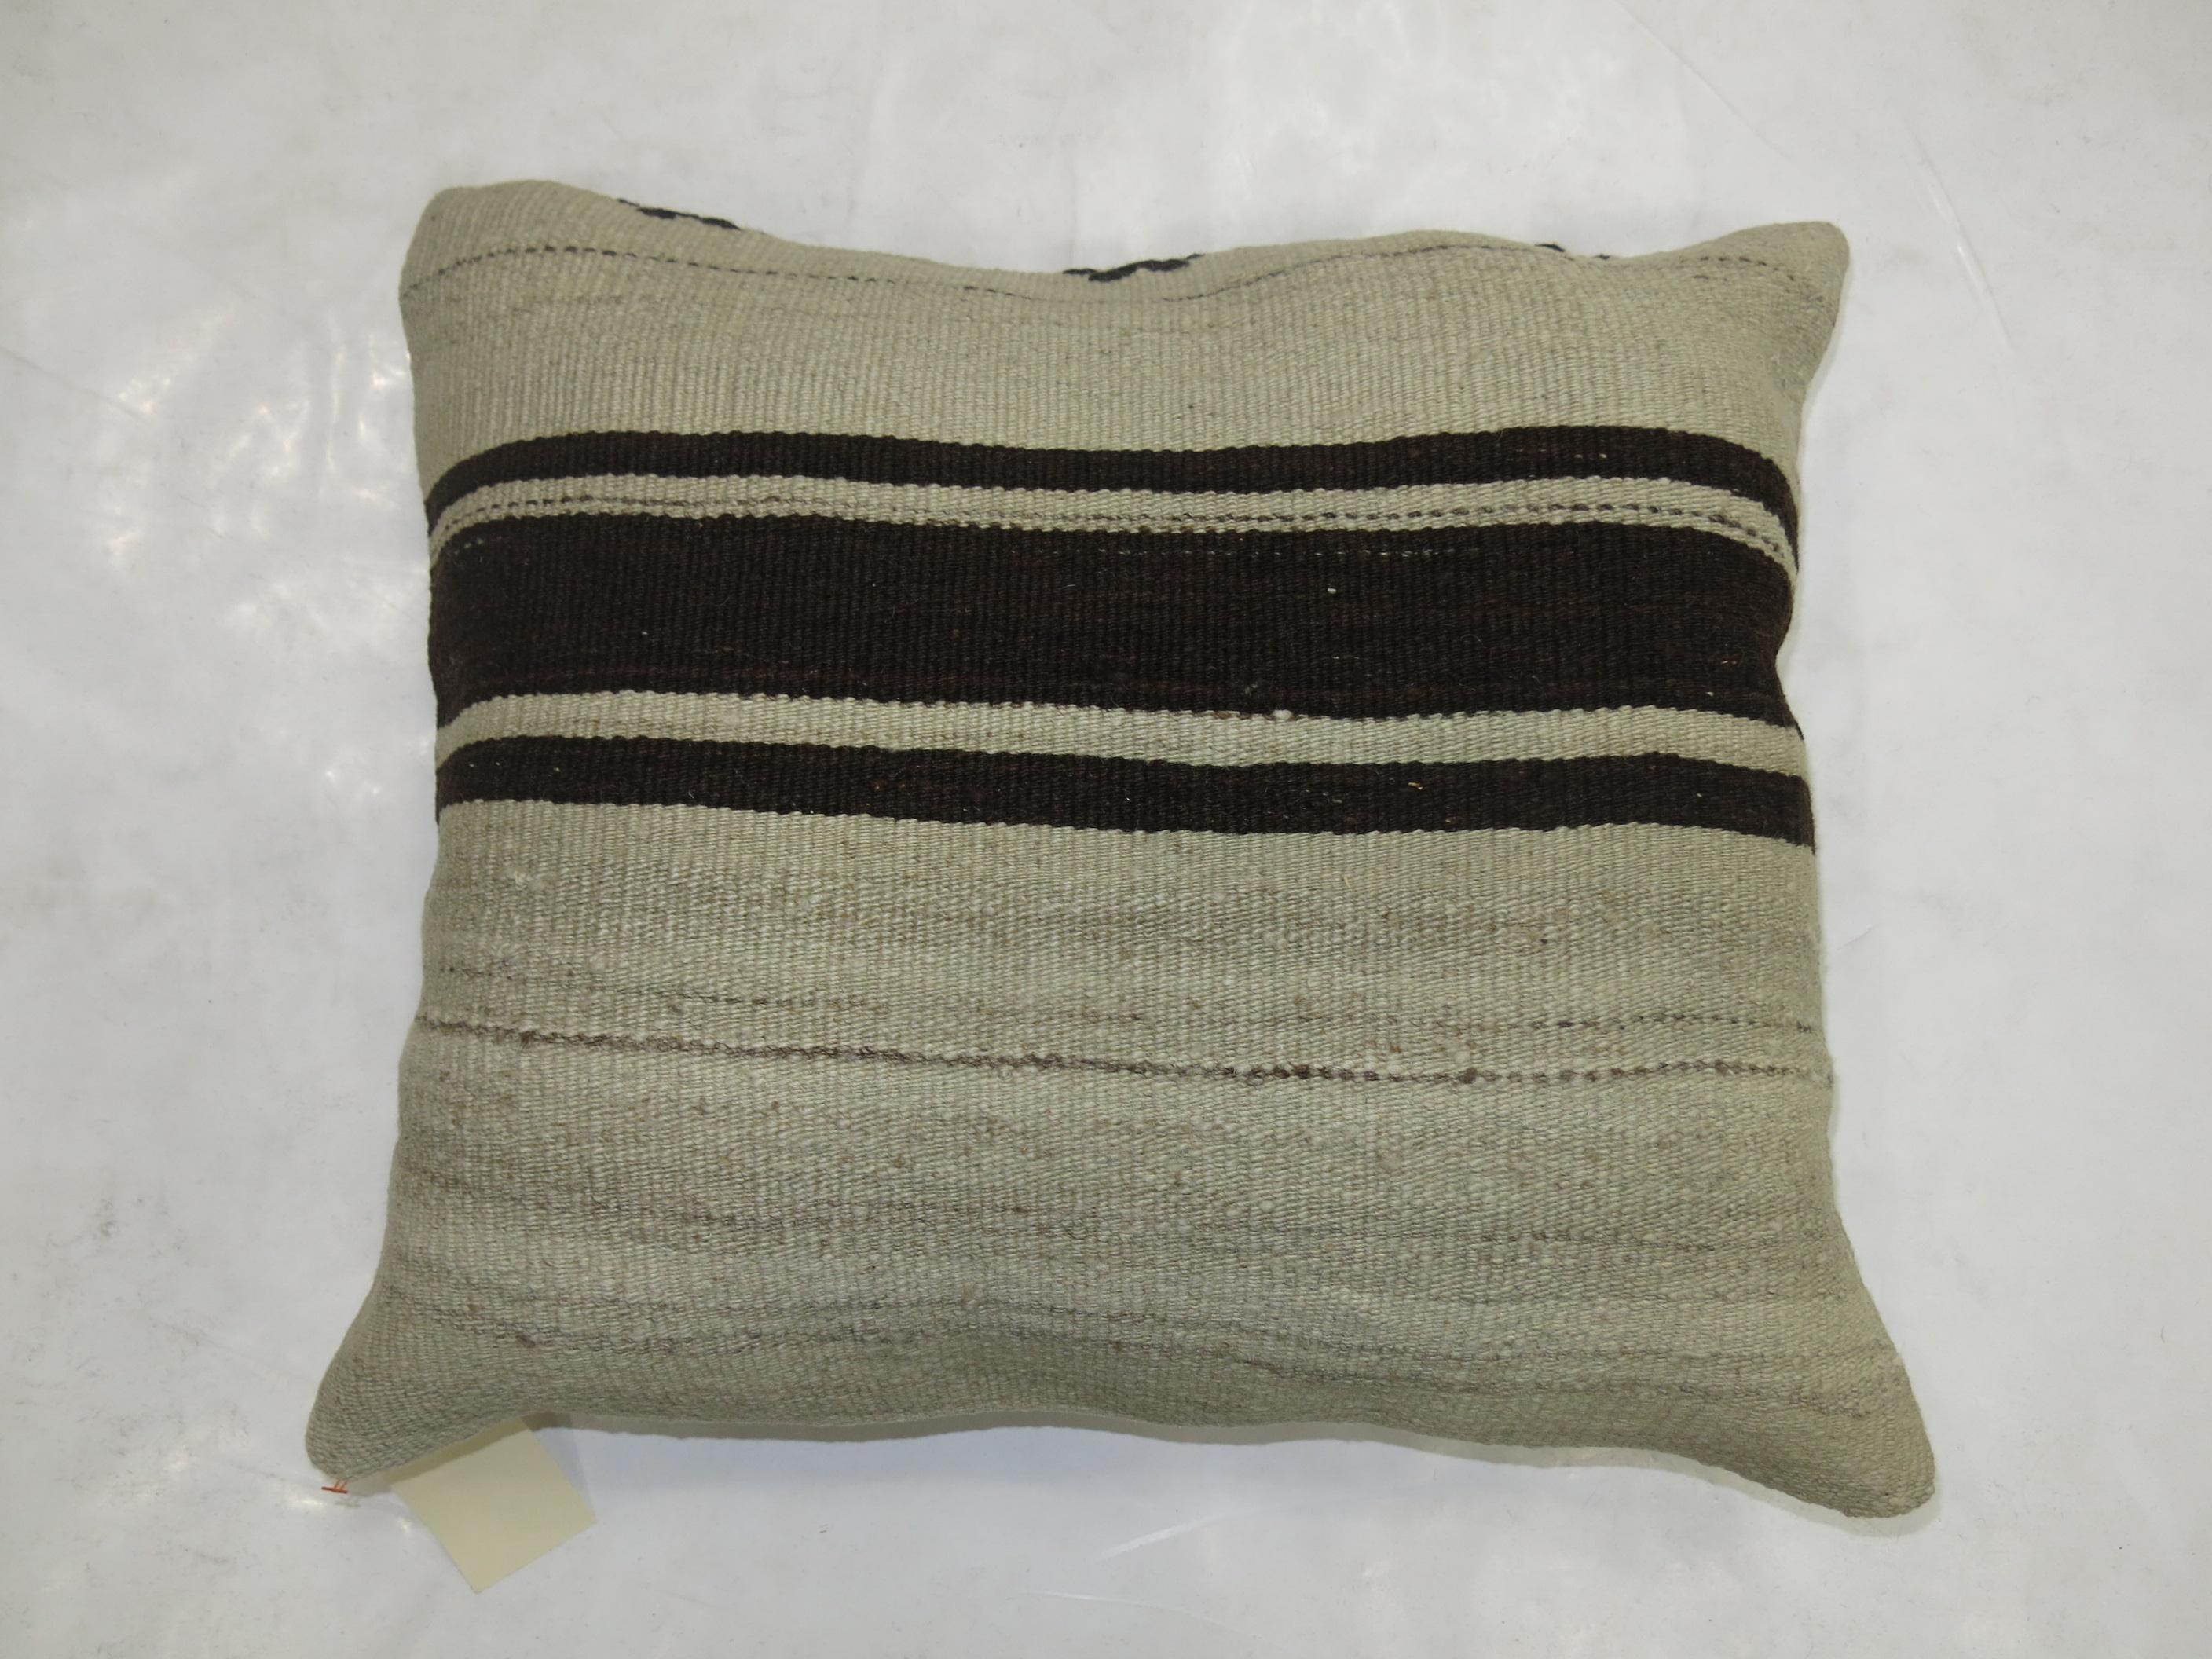 Pillow made from vintage Turkish Kilim.

Measures: 17'' x 20''